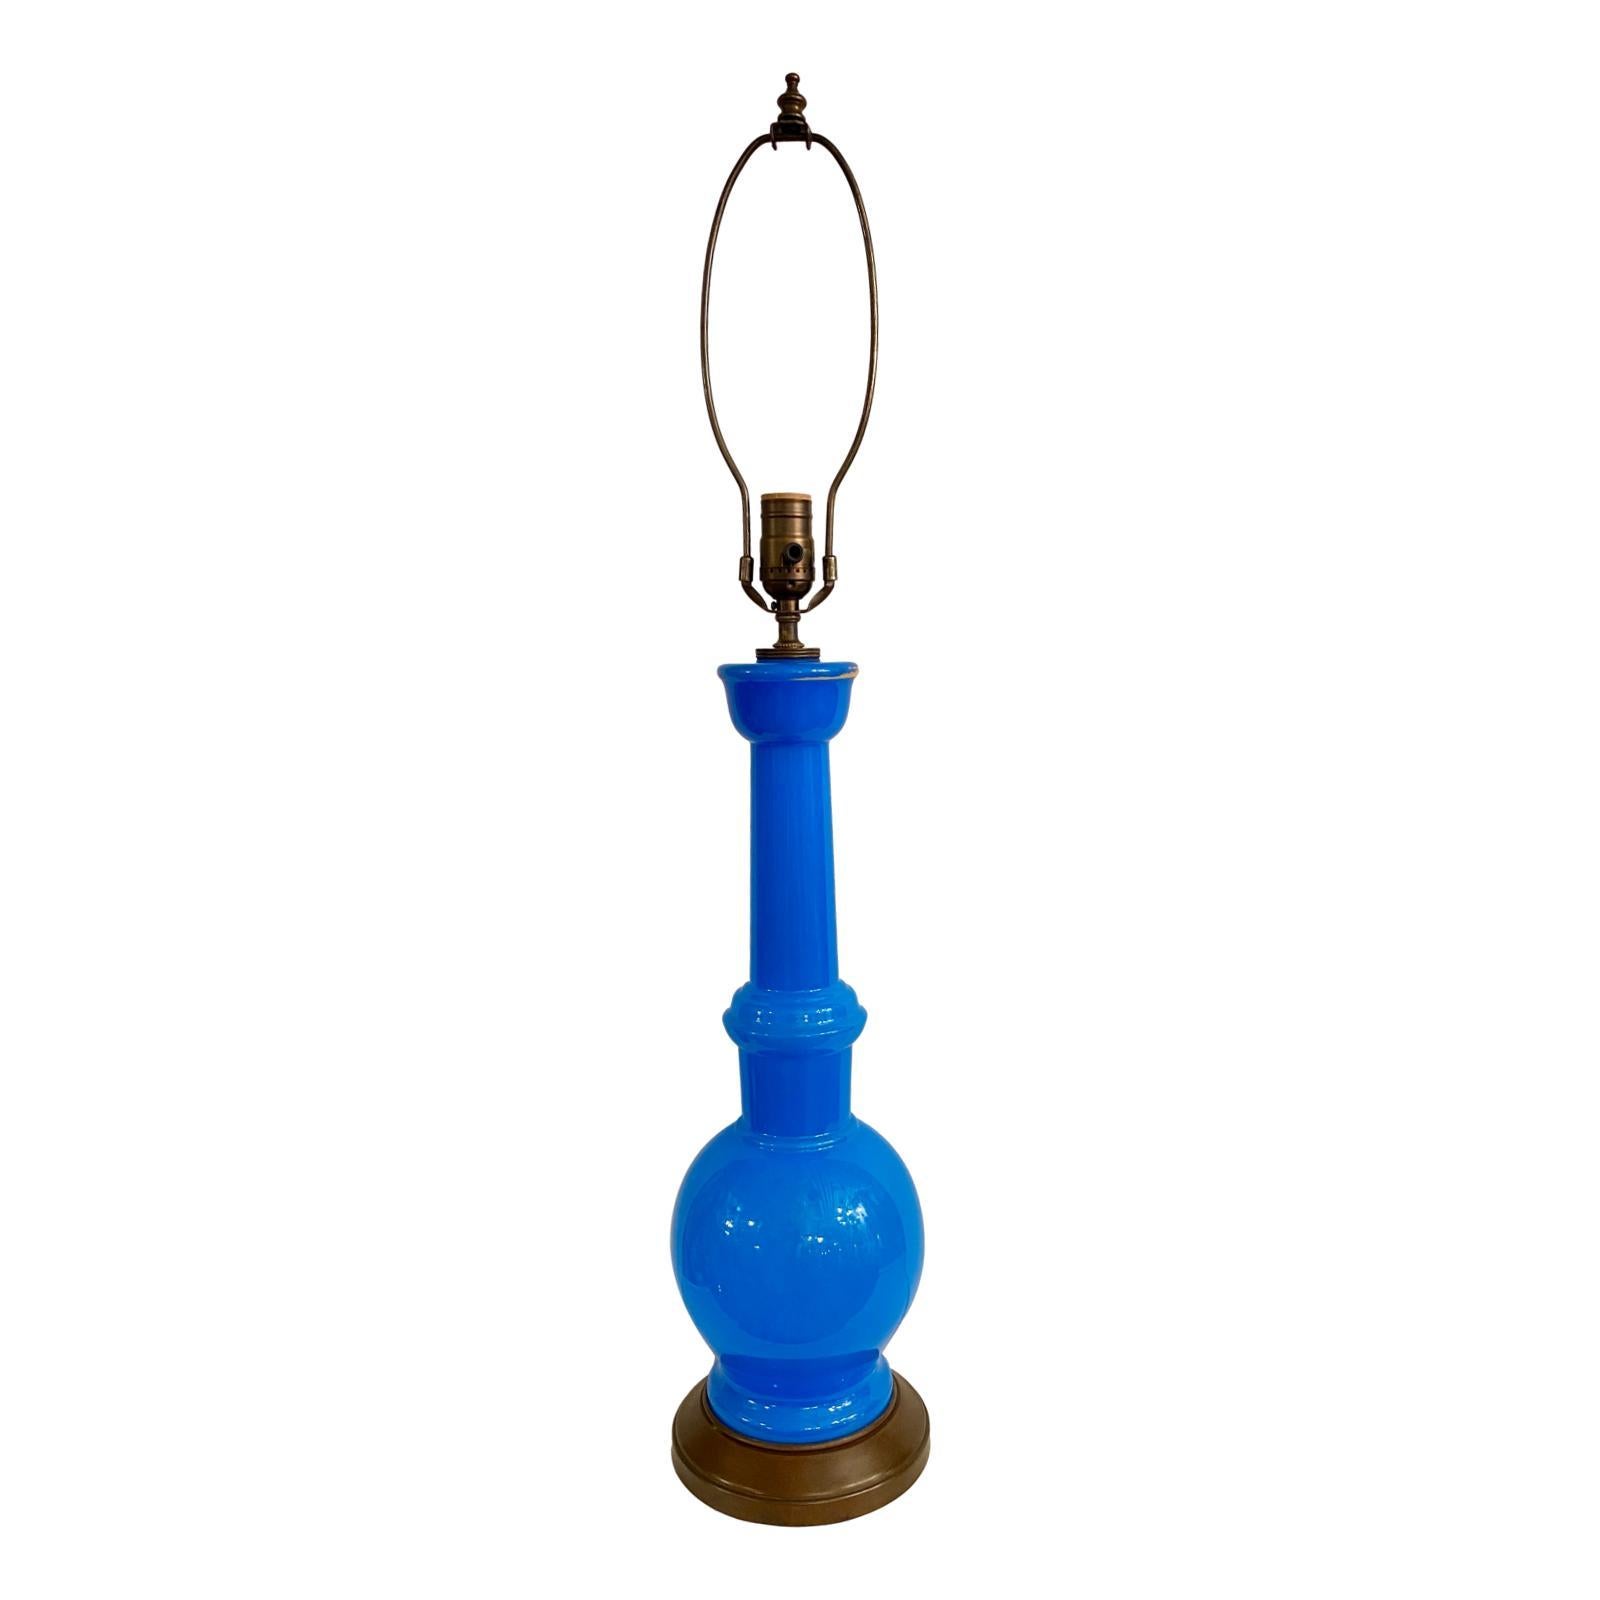 A single French circa 1930’s blue opaline glass table lamp.

Measurements:
Height of body: 23